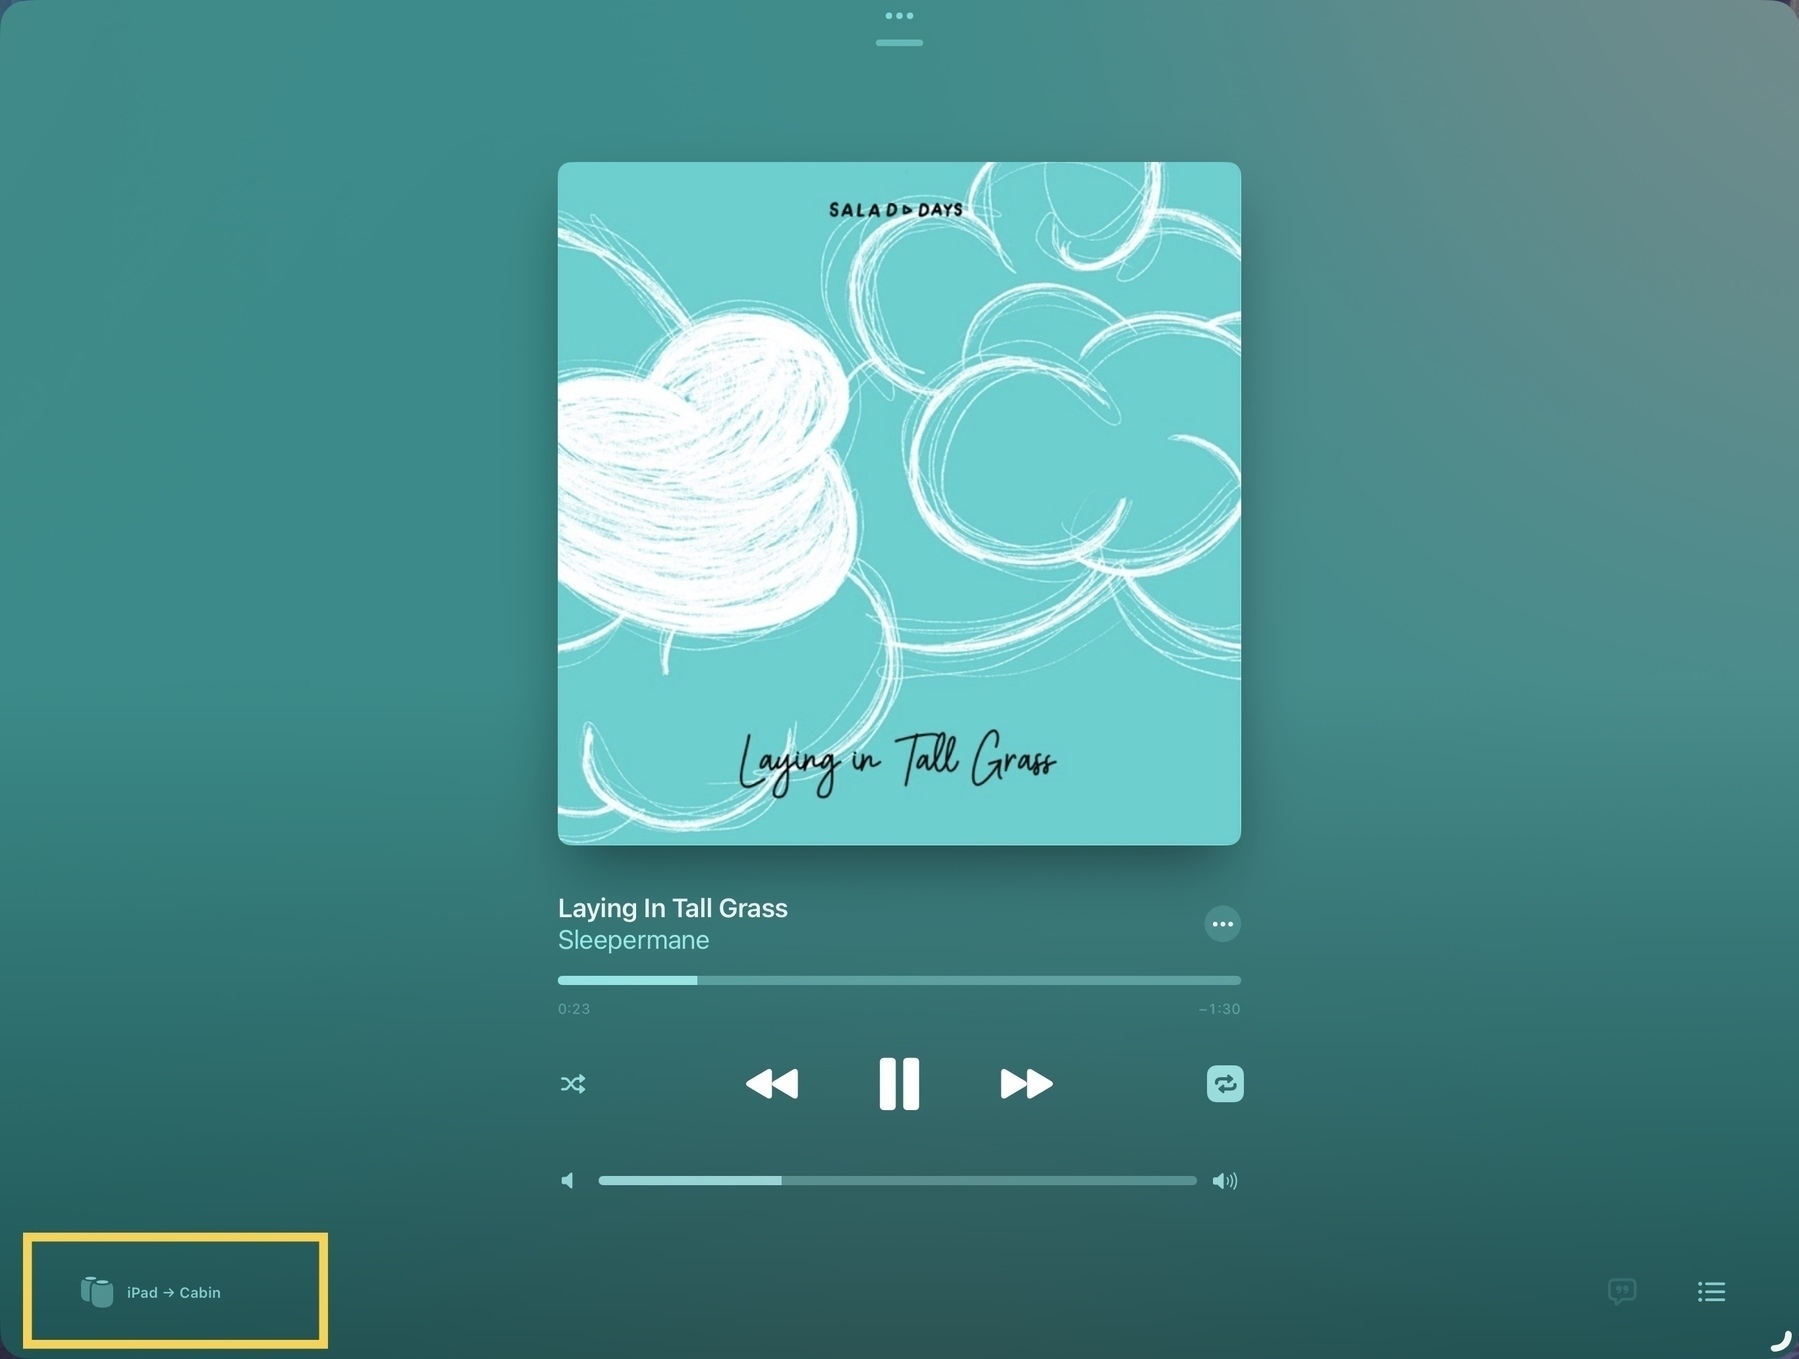 A screenshot showings the Music app on an iPad. A yellow box around the text iPad>Cabin demonstrates that audio is being sent from an iPad to HomePod speakers called Cabin